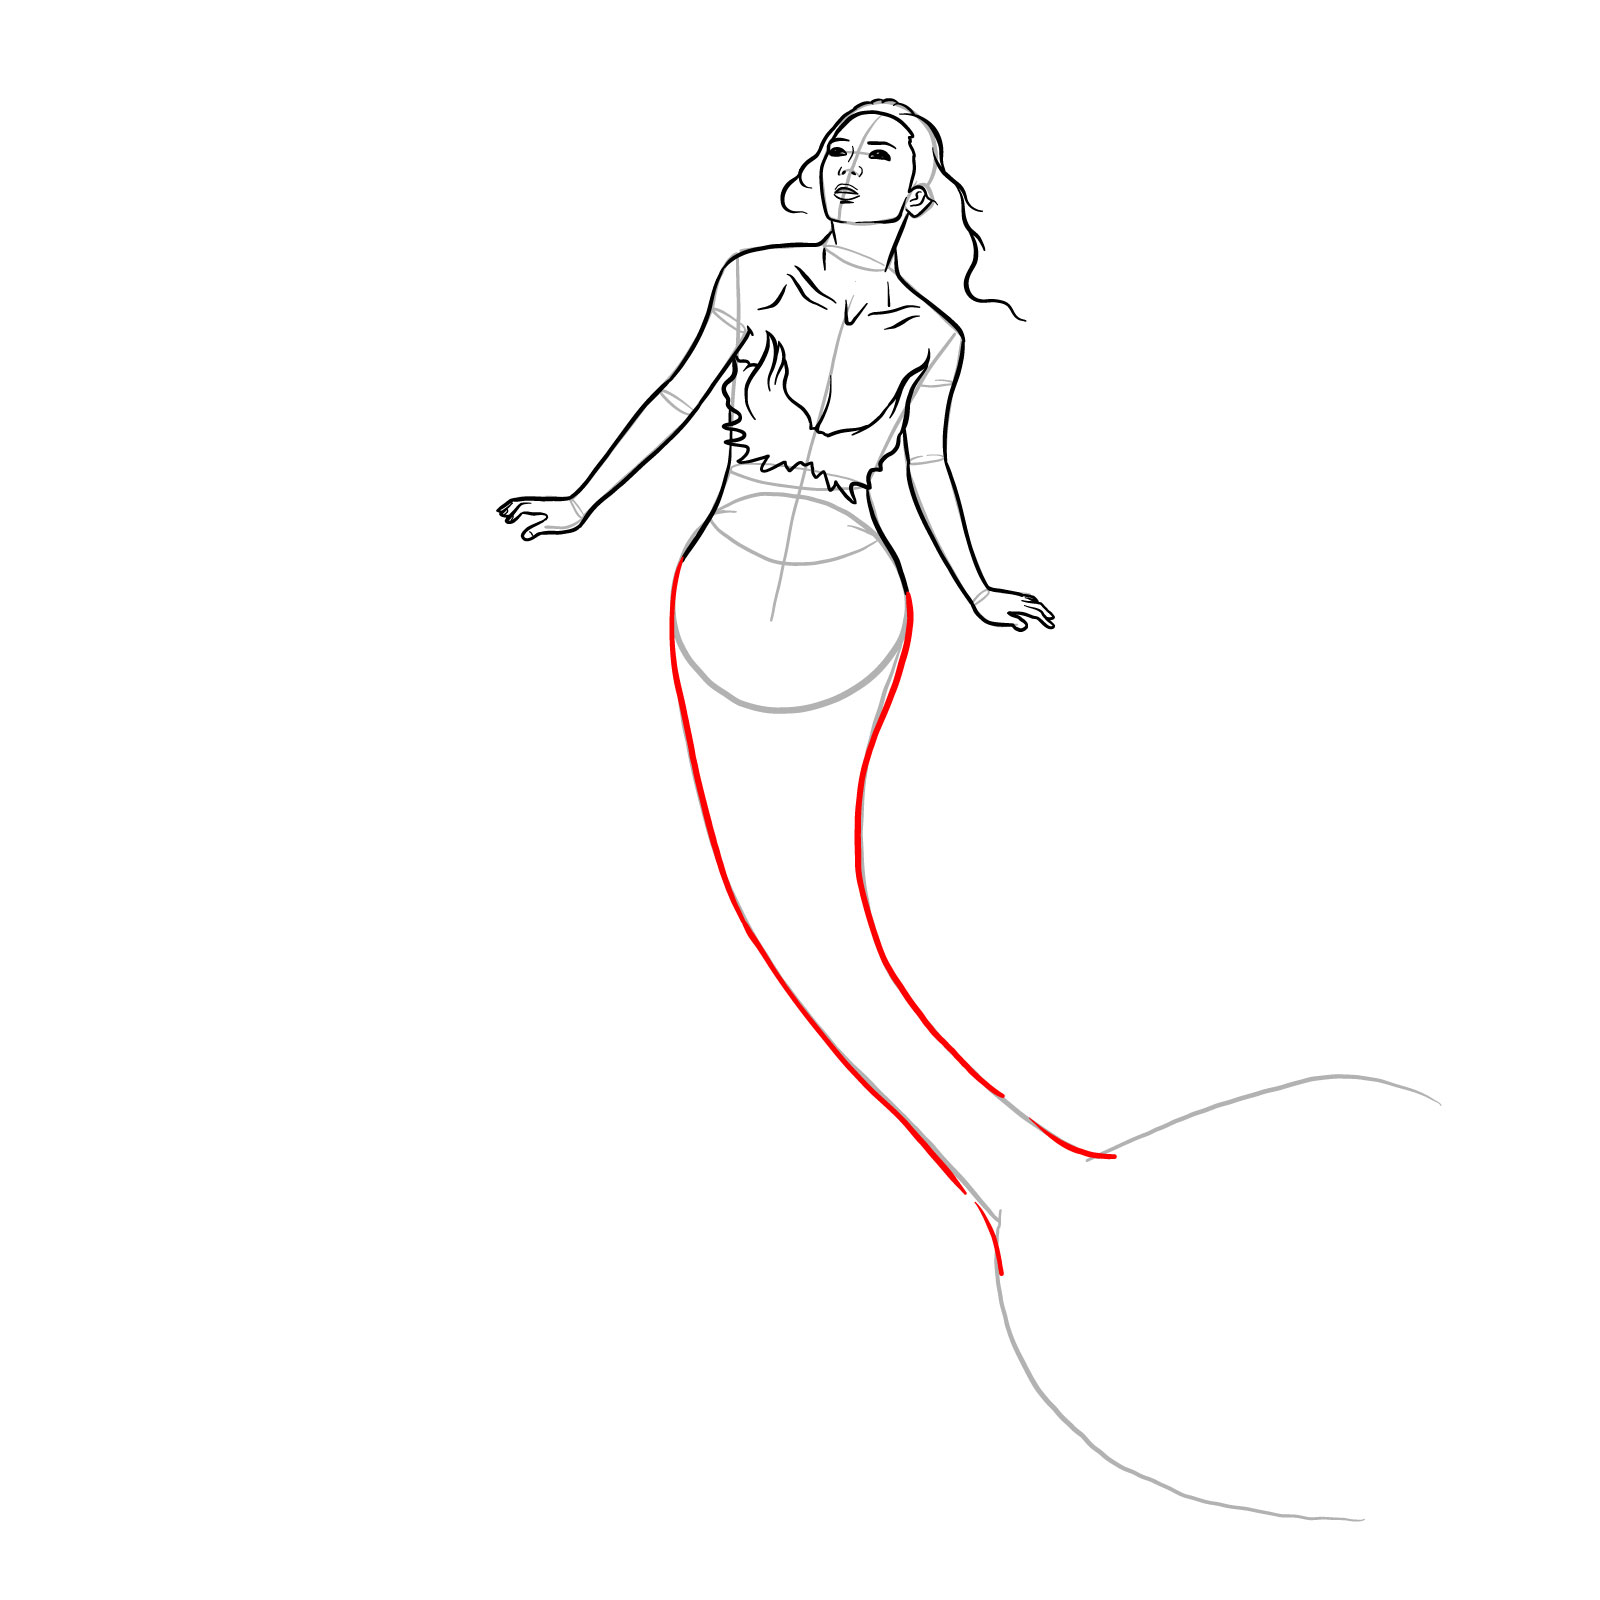 How to draw a Mermaid - step 19